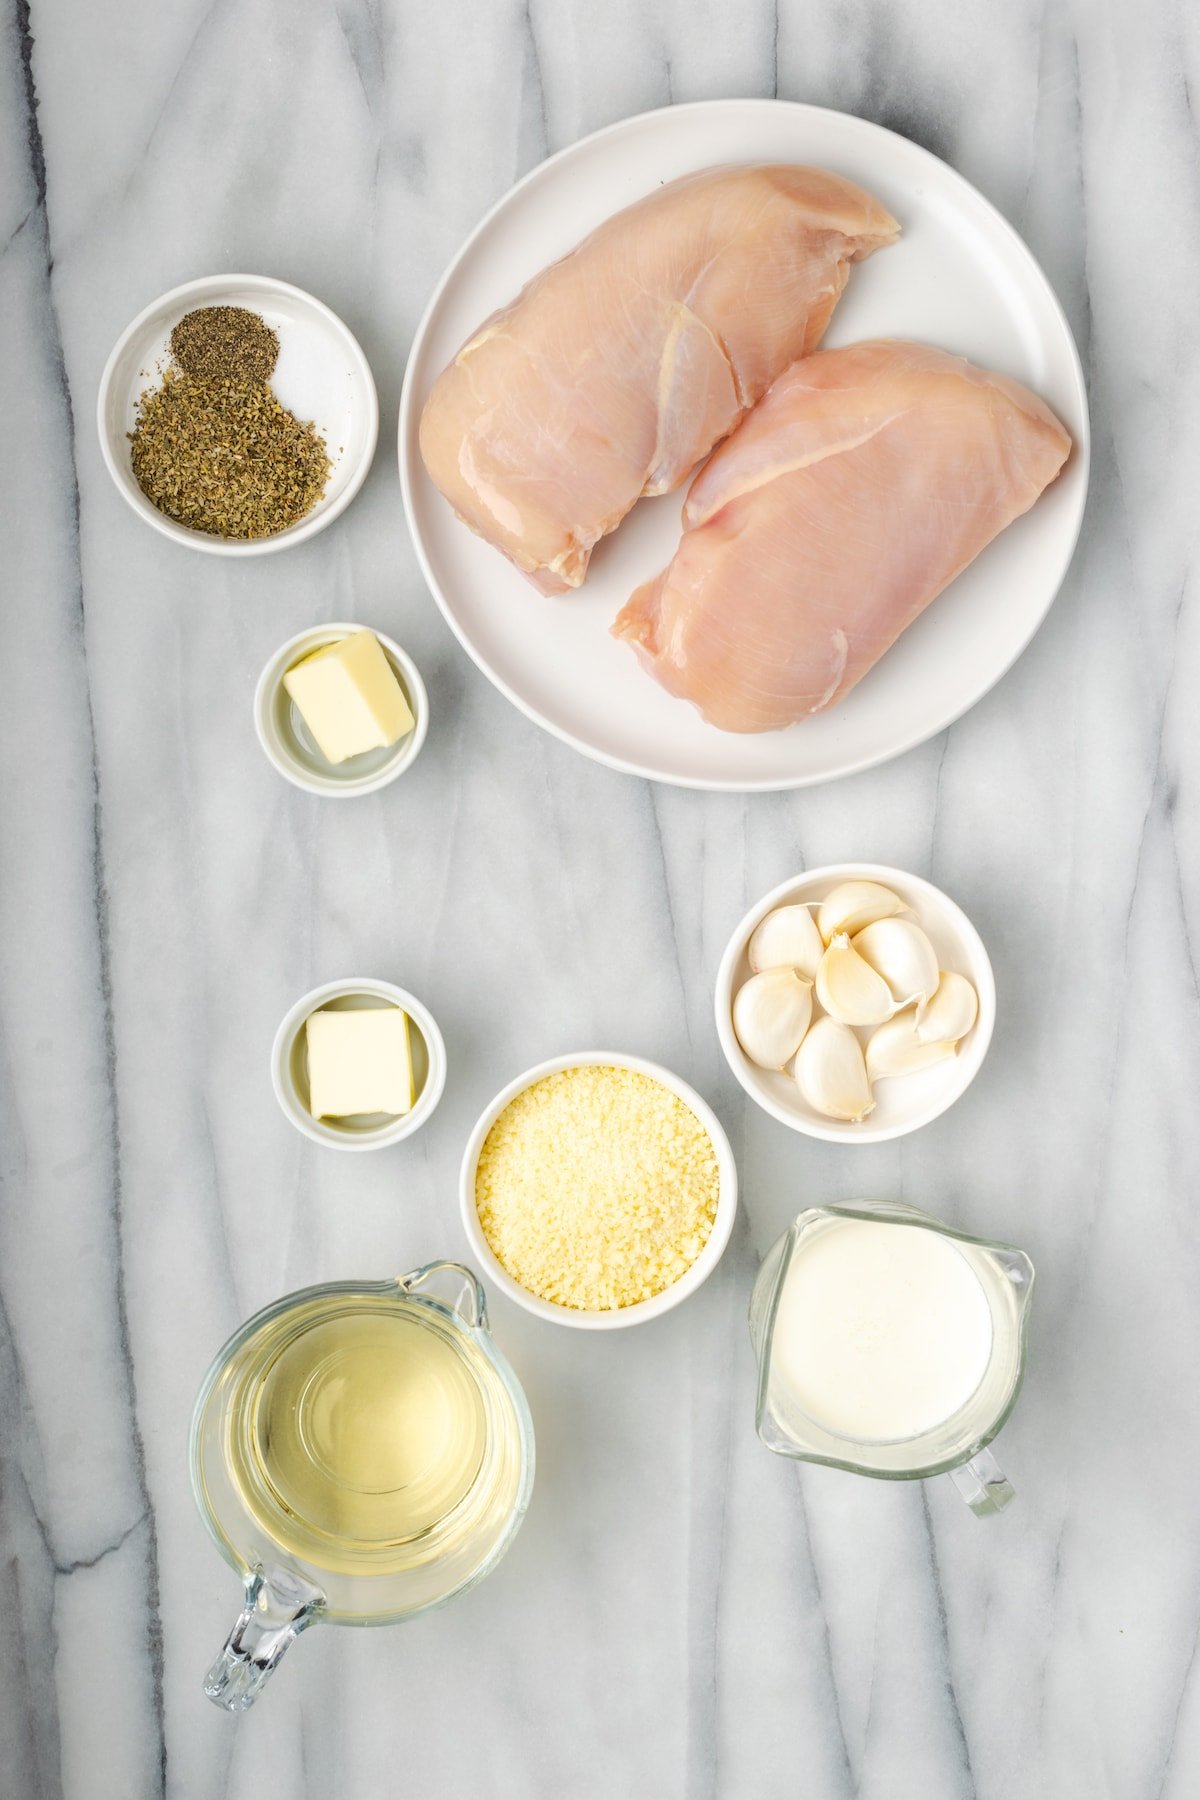 Overhead view of the ingredients needed for garlic parmesan chicken: two chicken breasts, a bowl of garlic, a bowl of parmesan cheese, a glass of white wine, a glass of heavy cream, two ramekins of butter, and a bowl with salt, pepper, and Italian seasoning